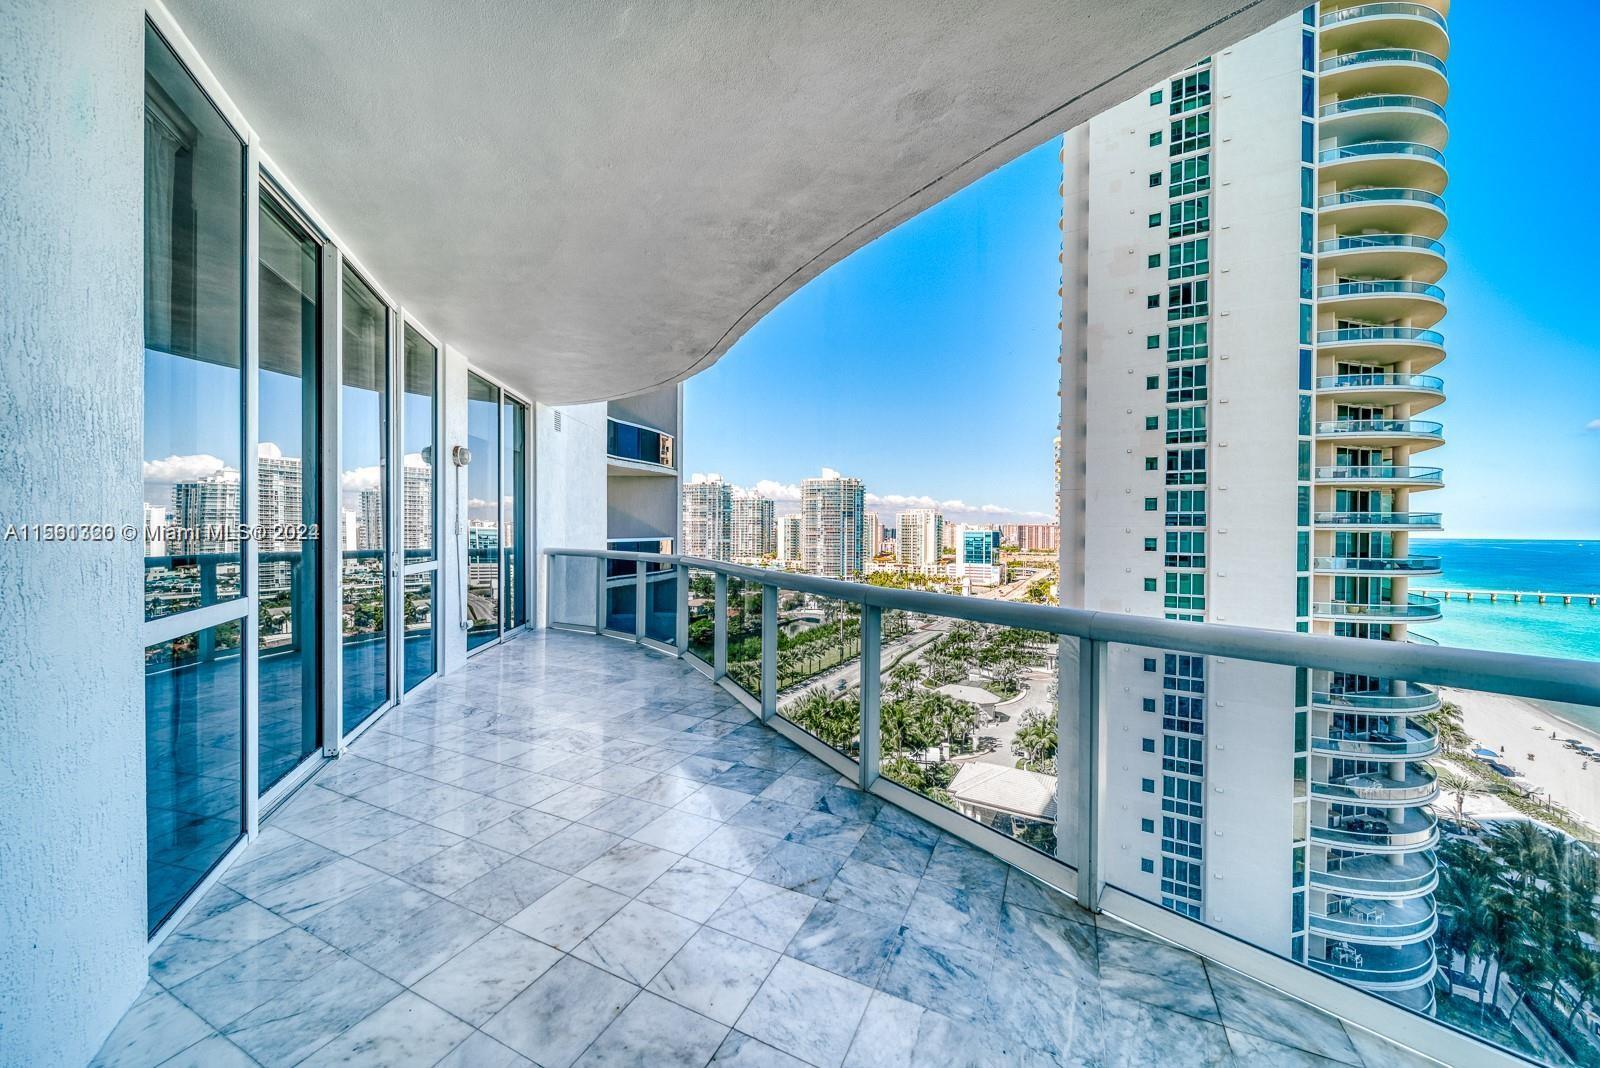 Photo of 16001 Collins Ave #1403 in Sunny Isles Beach, FL